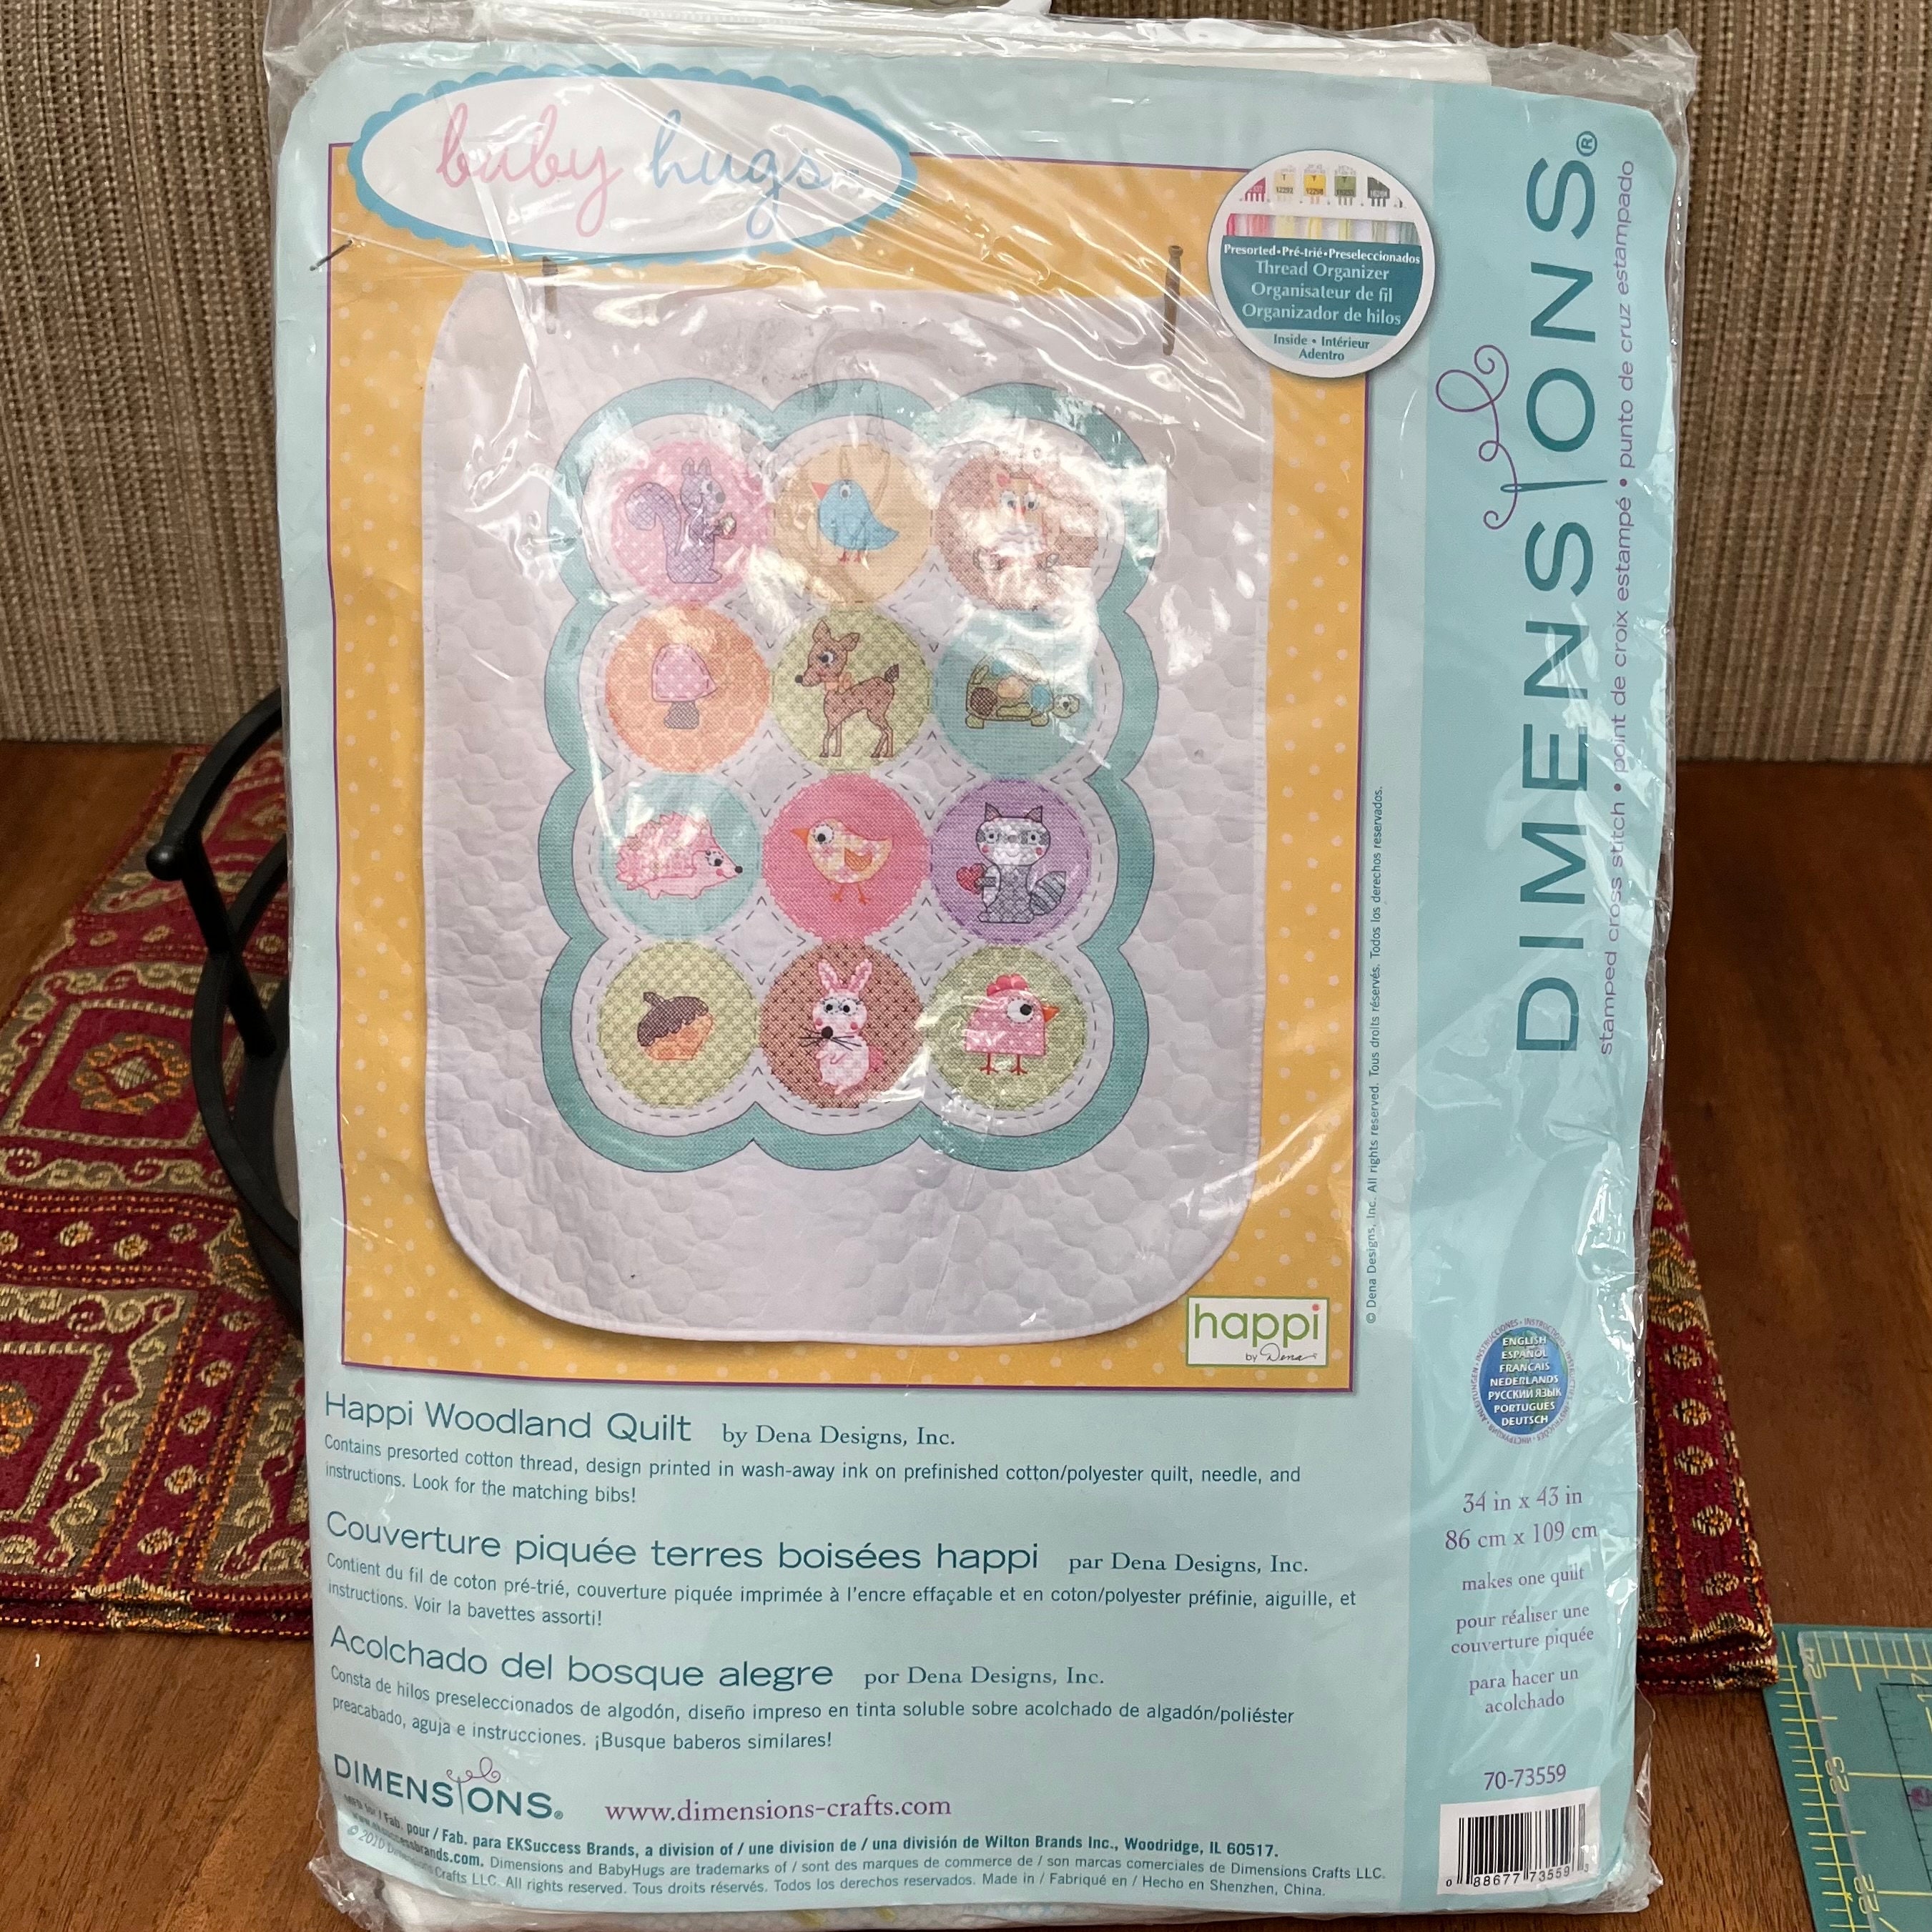 Dimensions Stamped Cross Stitch Kit - Baby Kimba Quilt